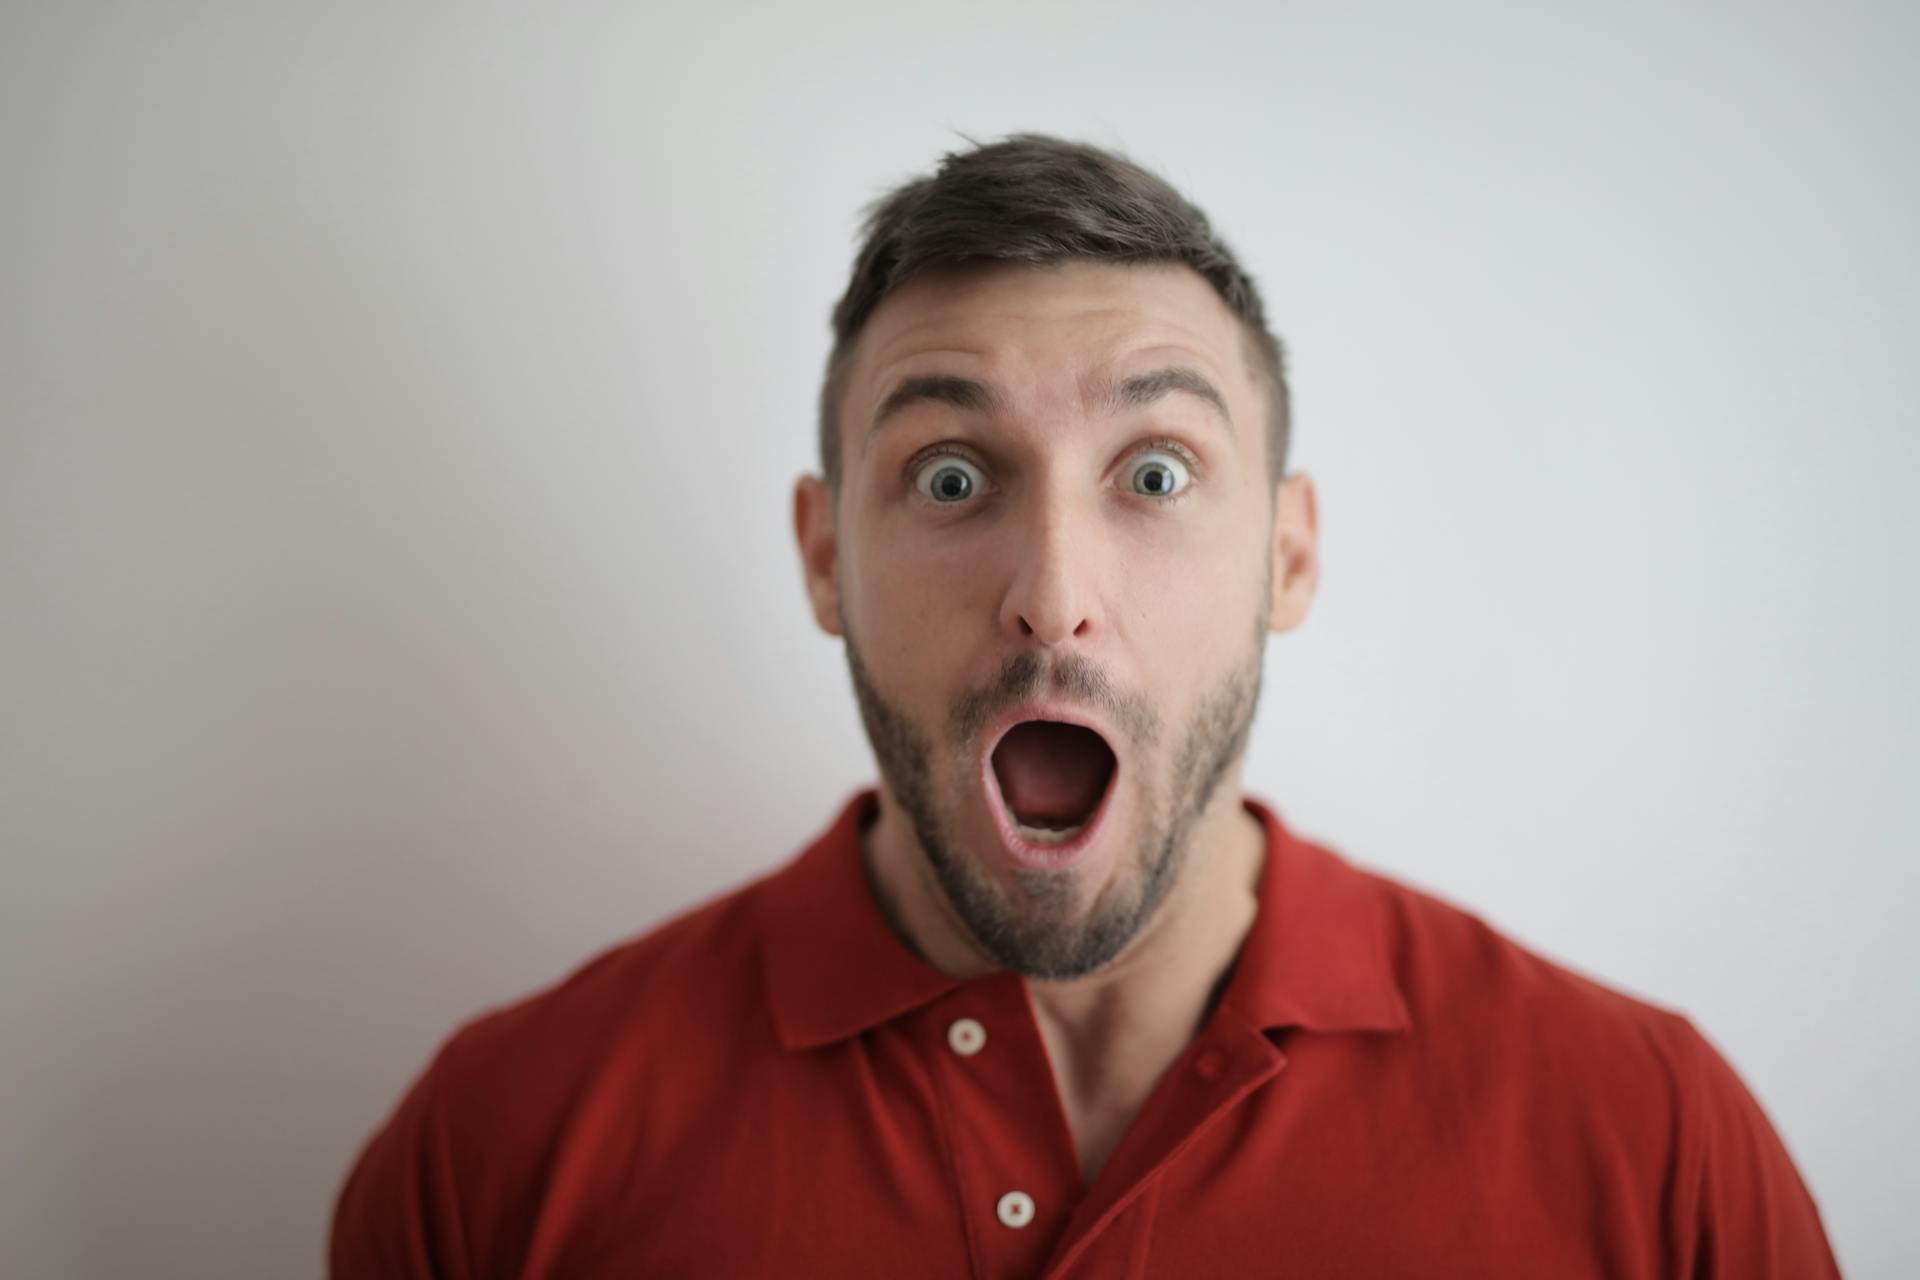 A shocked man in red | Source: Pexels